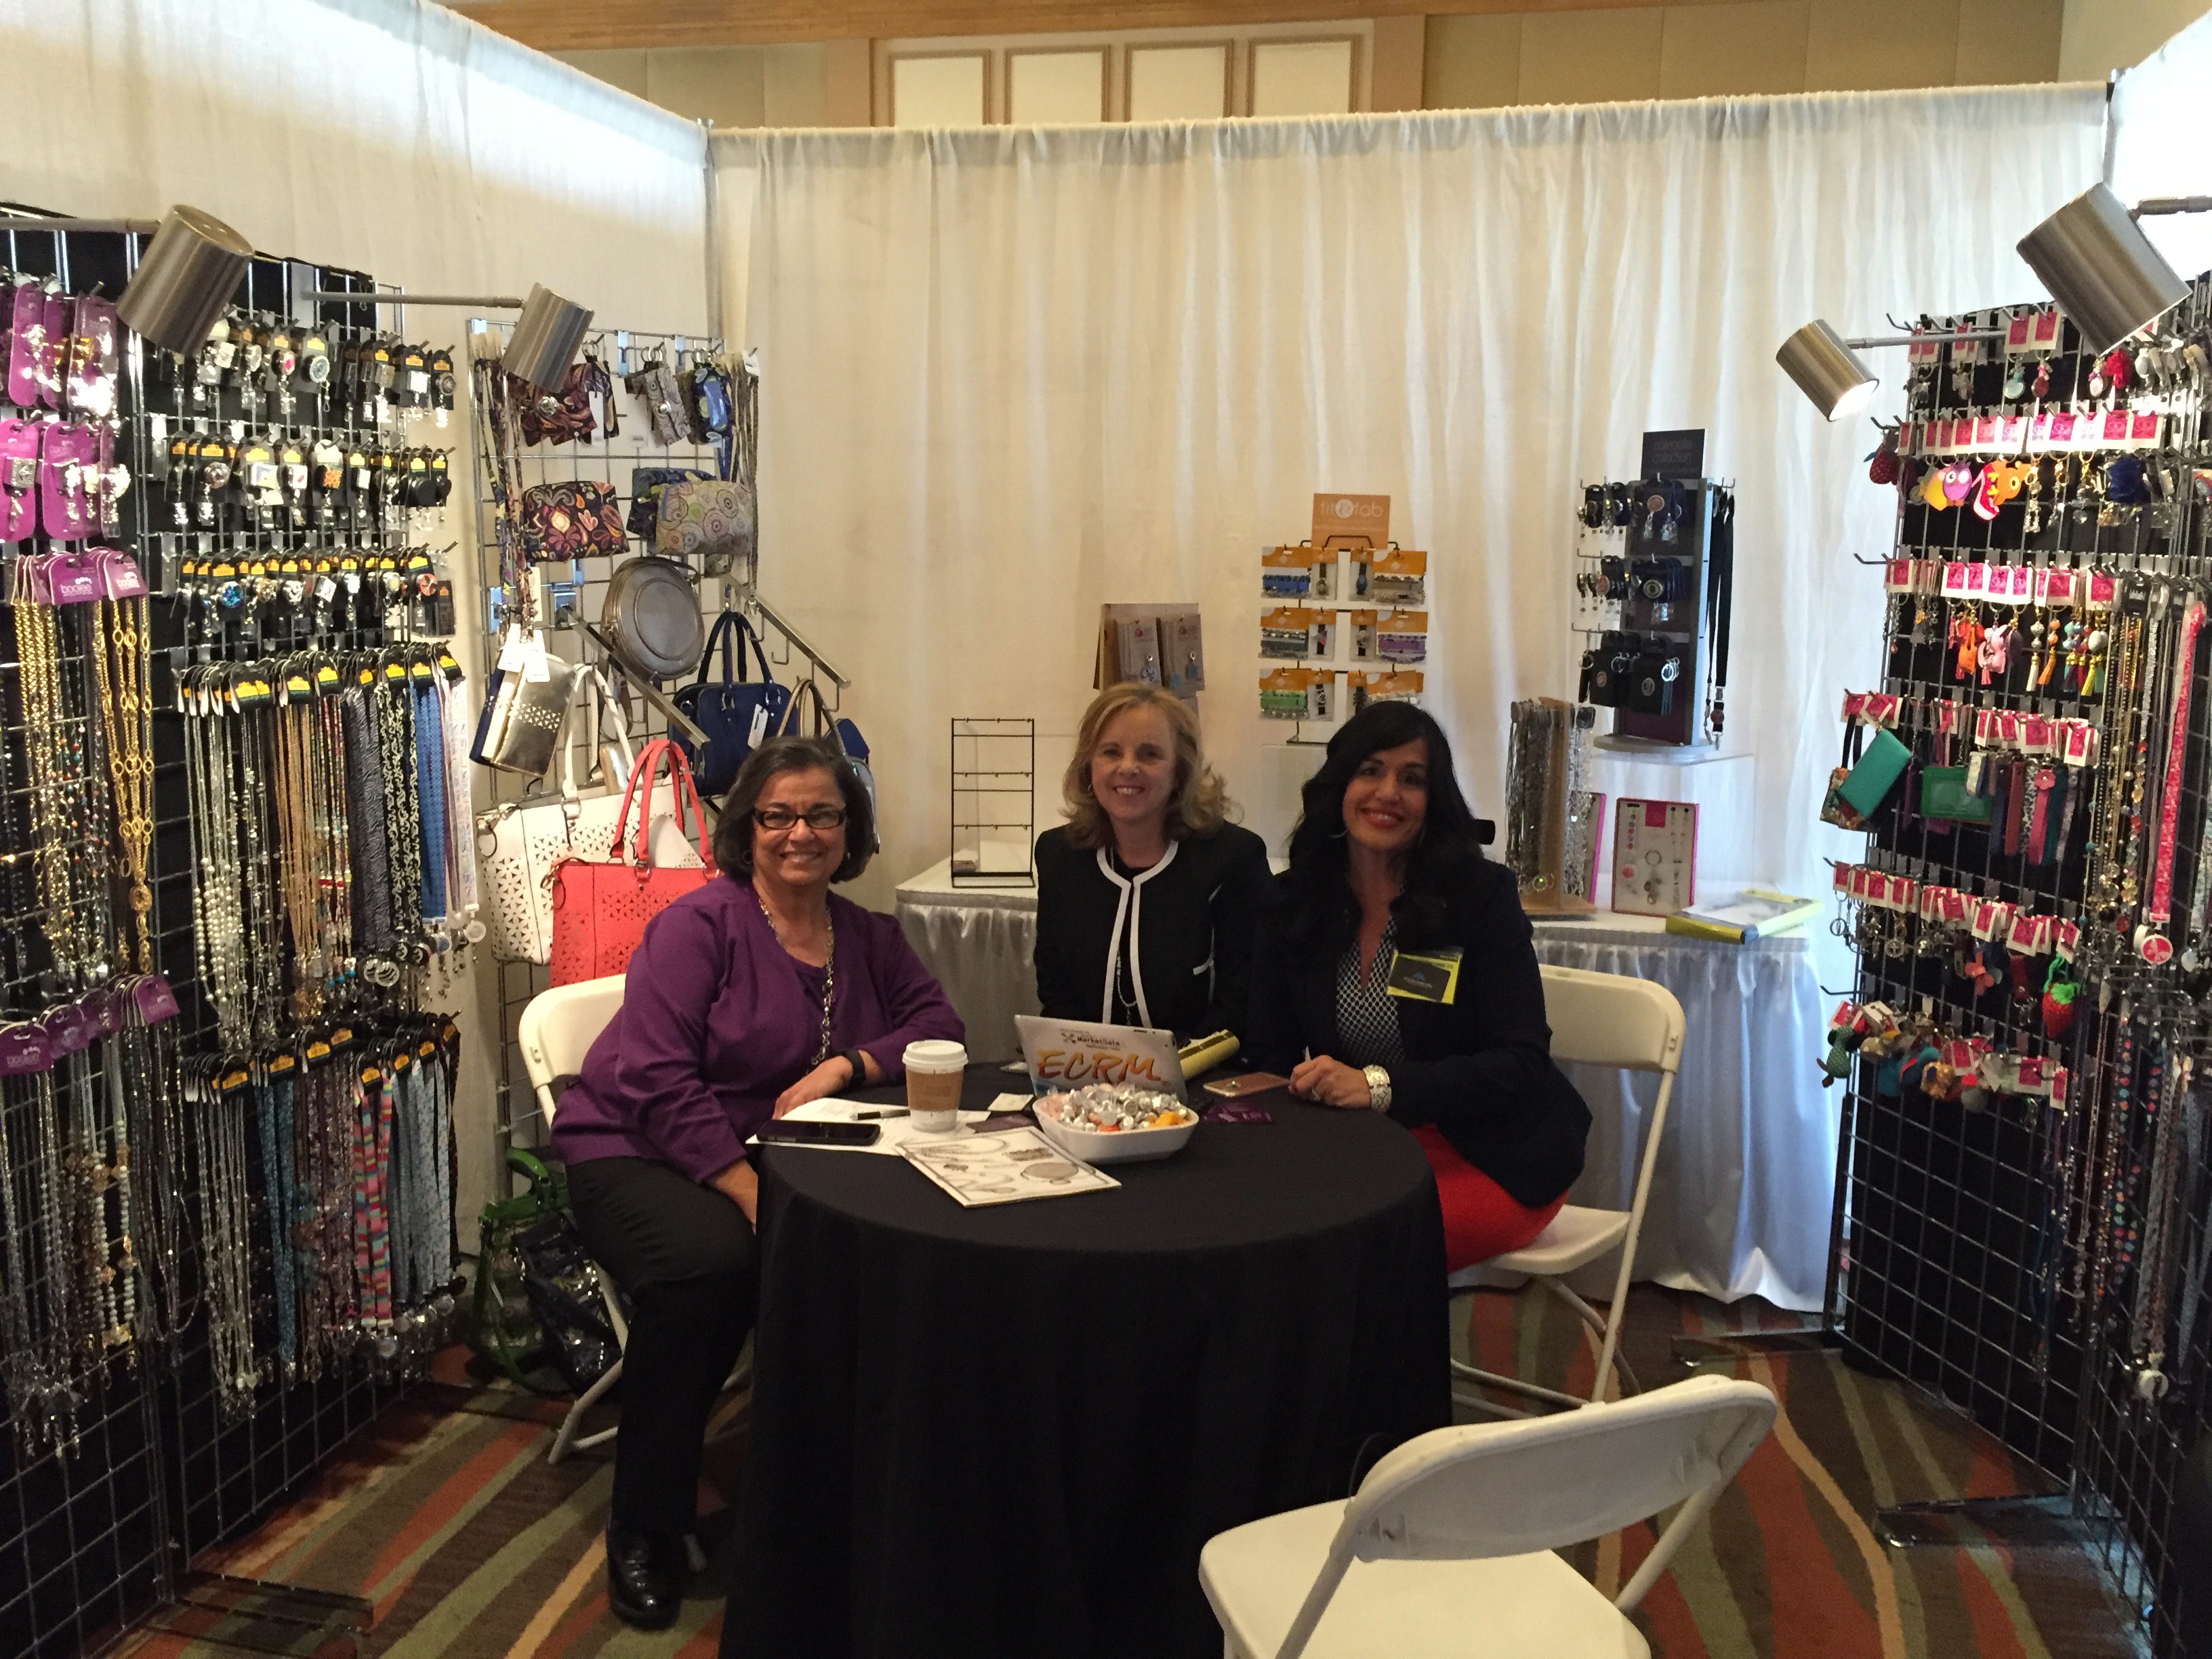 Home & Gift EPPS: Bonitas International's booth was decked out with fabulous jewelry, accessories and more!